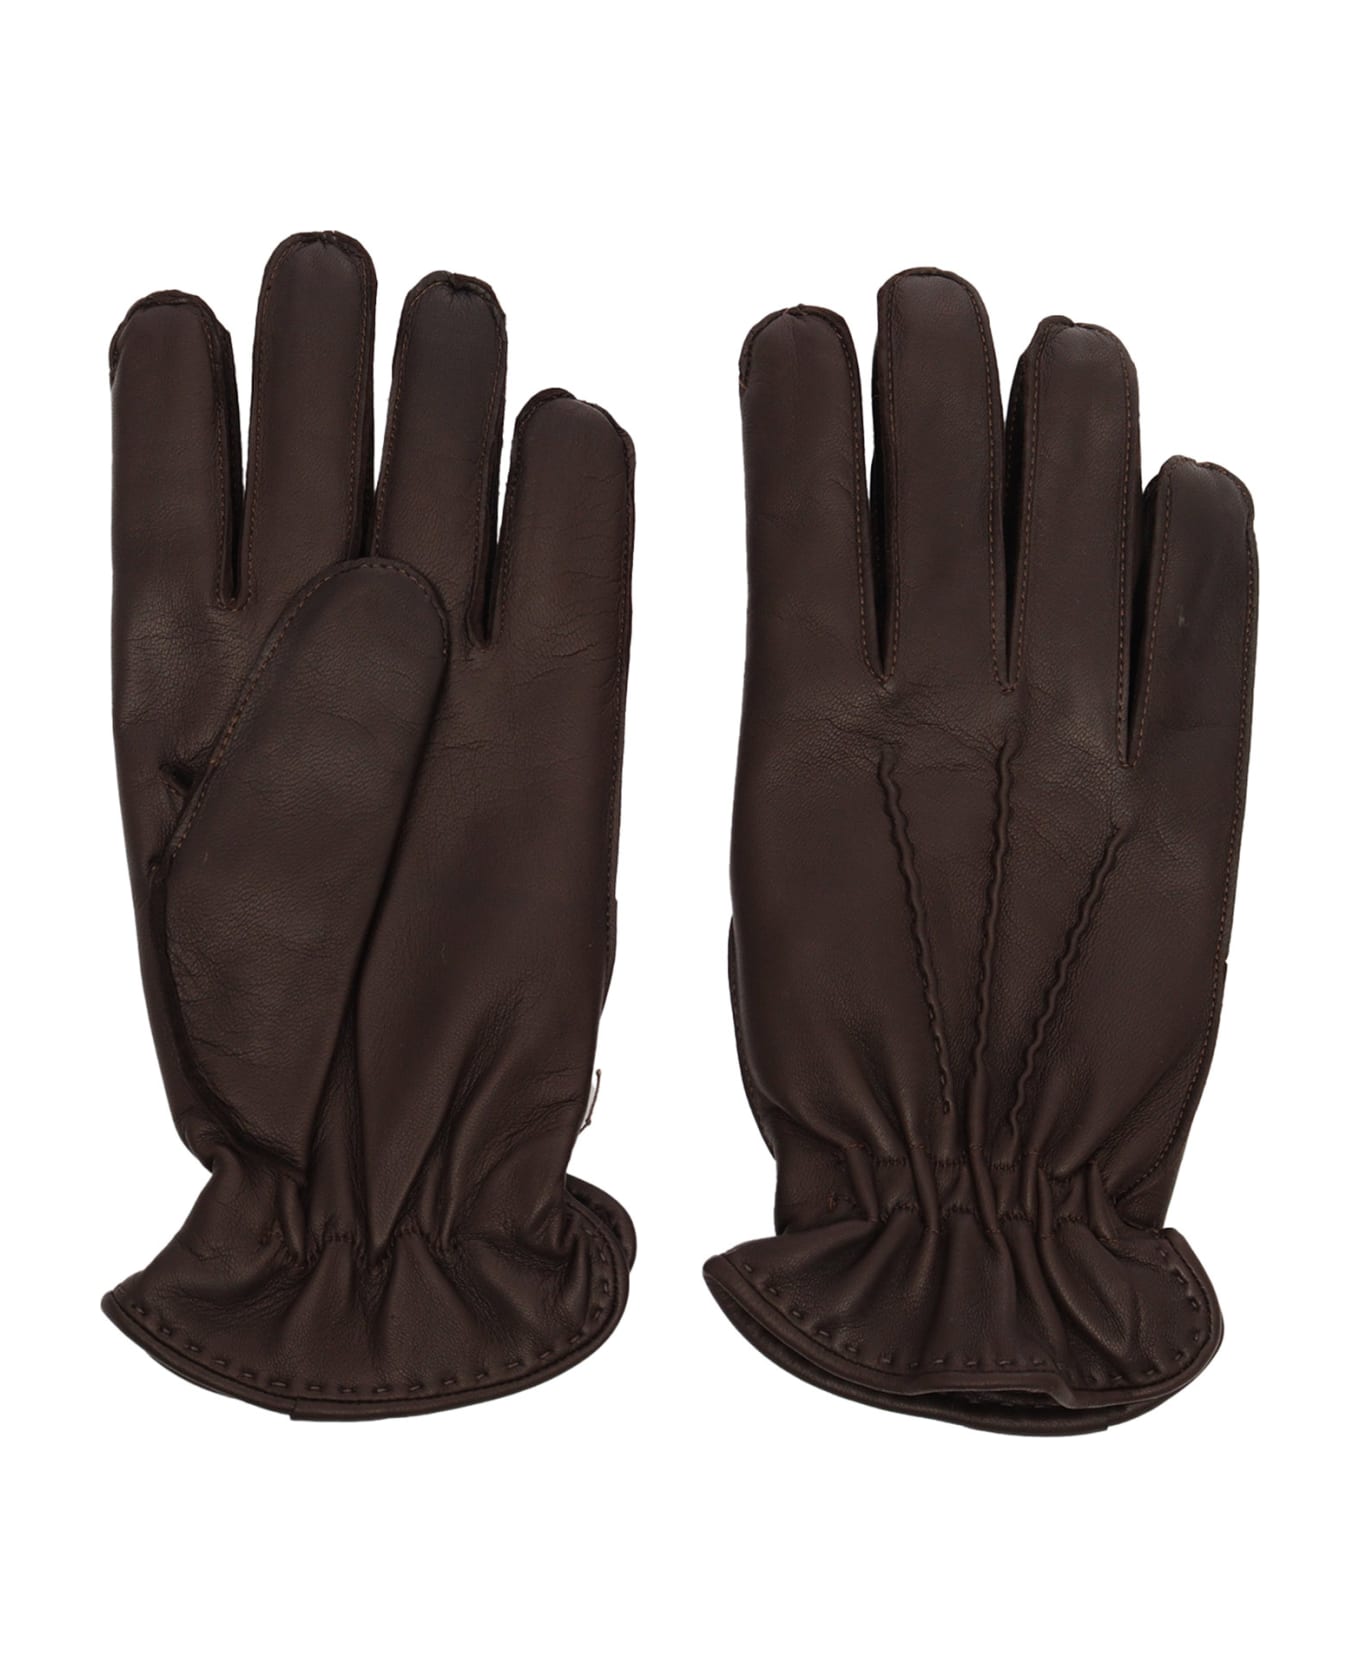 Orciani Leather Gloves - BROWN